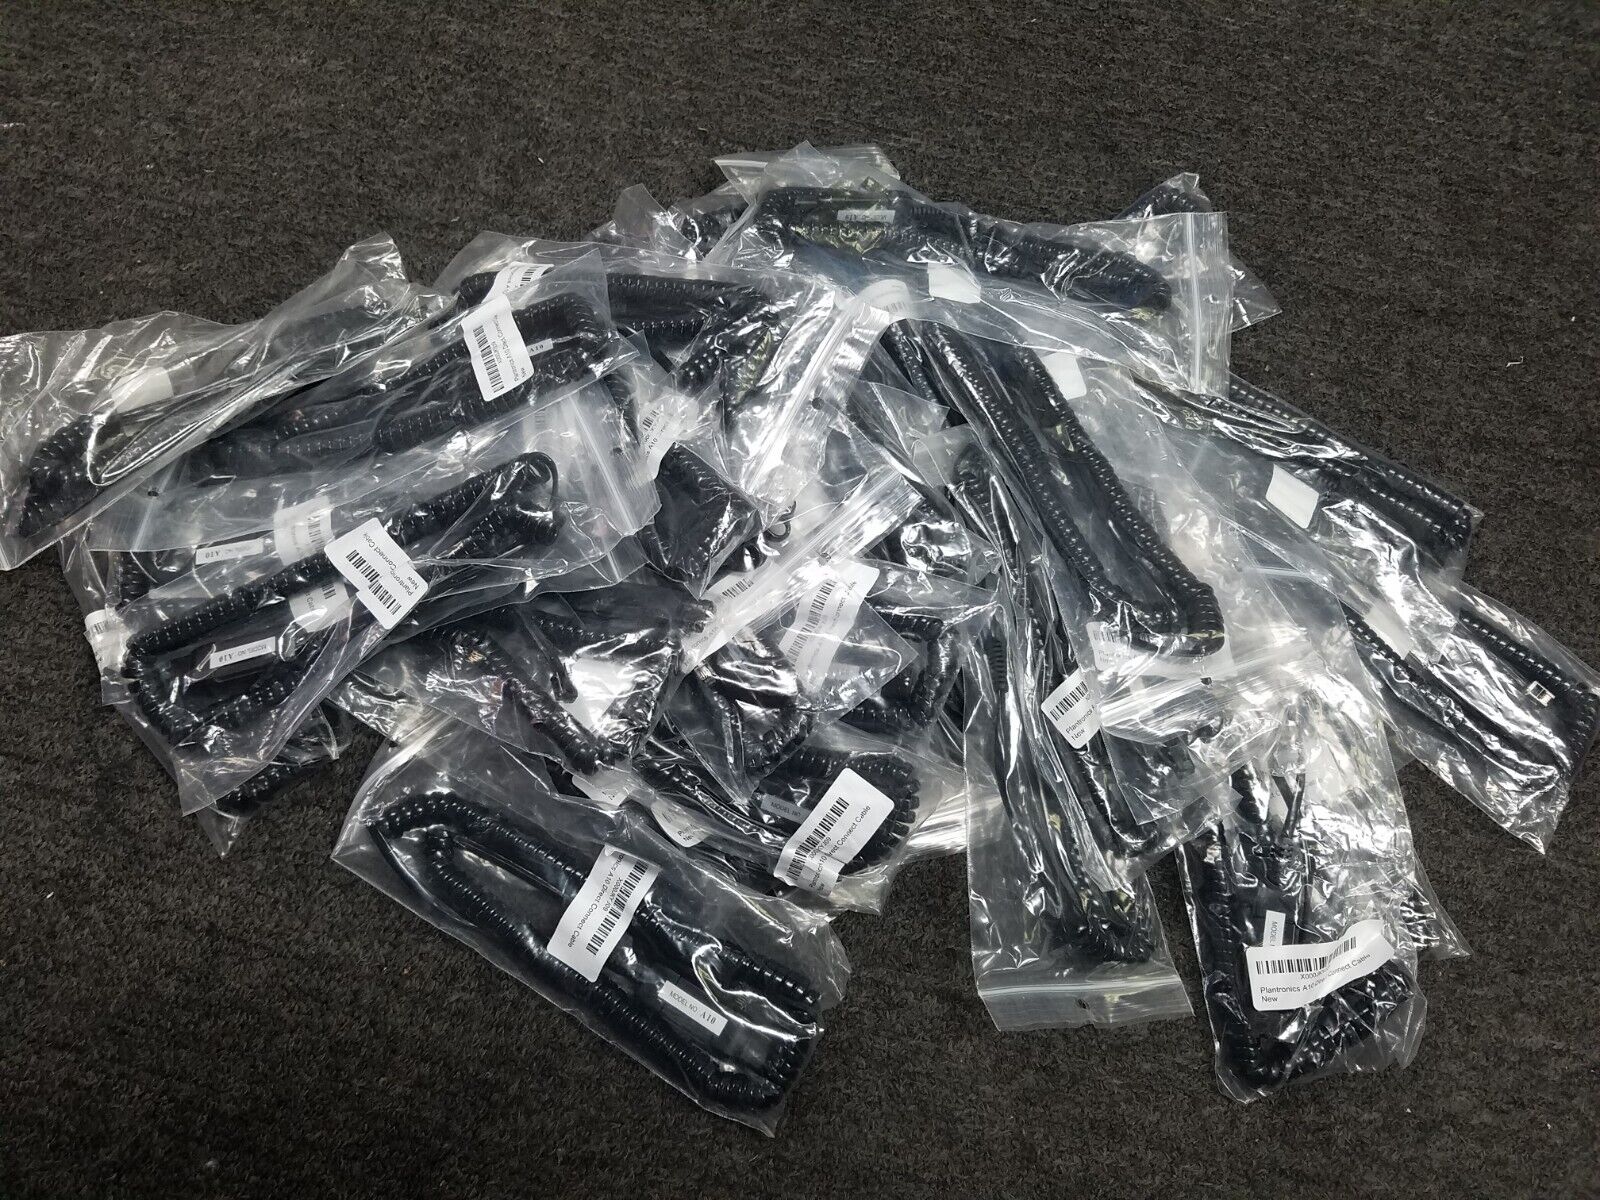 (LOT OF 30) A10 Direct Connect Headset Cable for Plantronics *NEW*